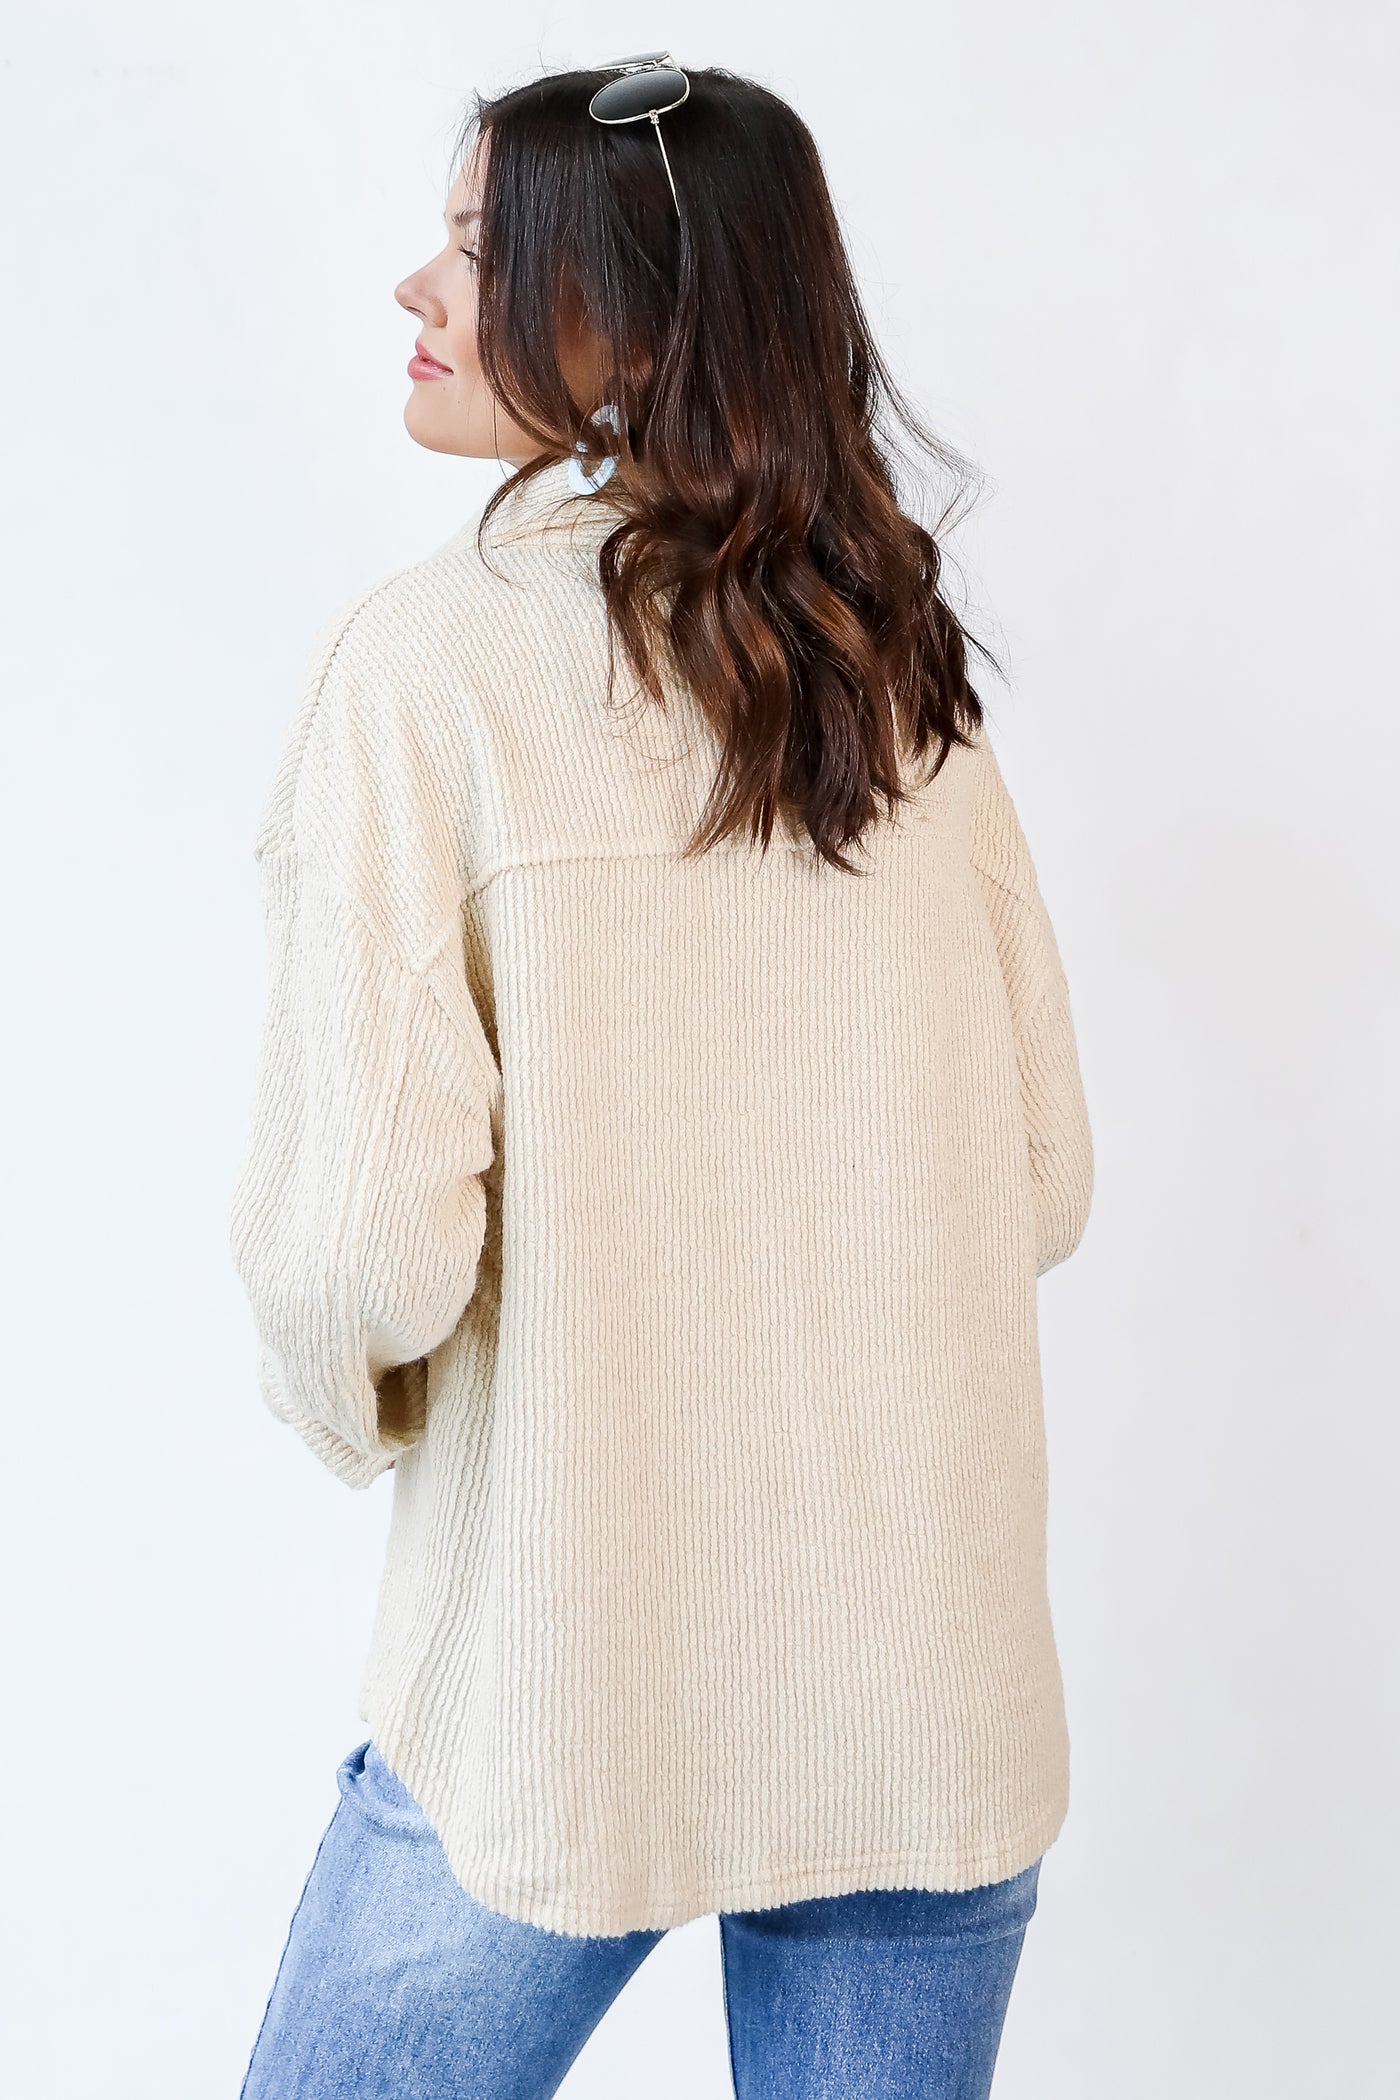 Corded Shacket in ivory back view